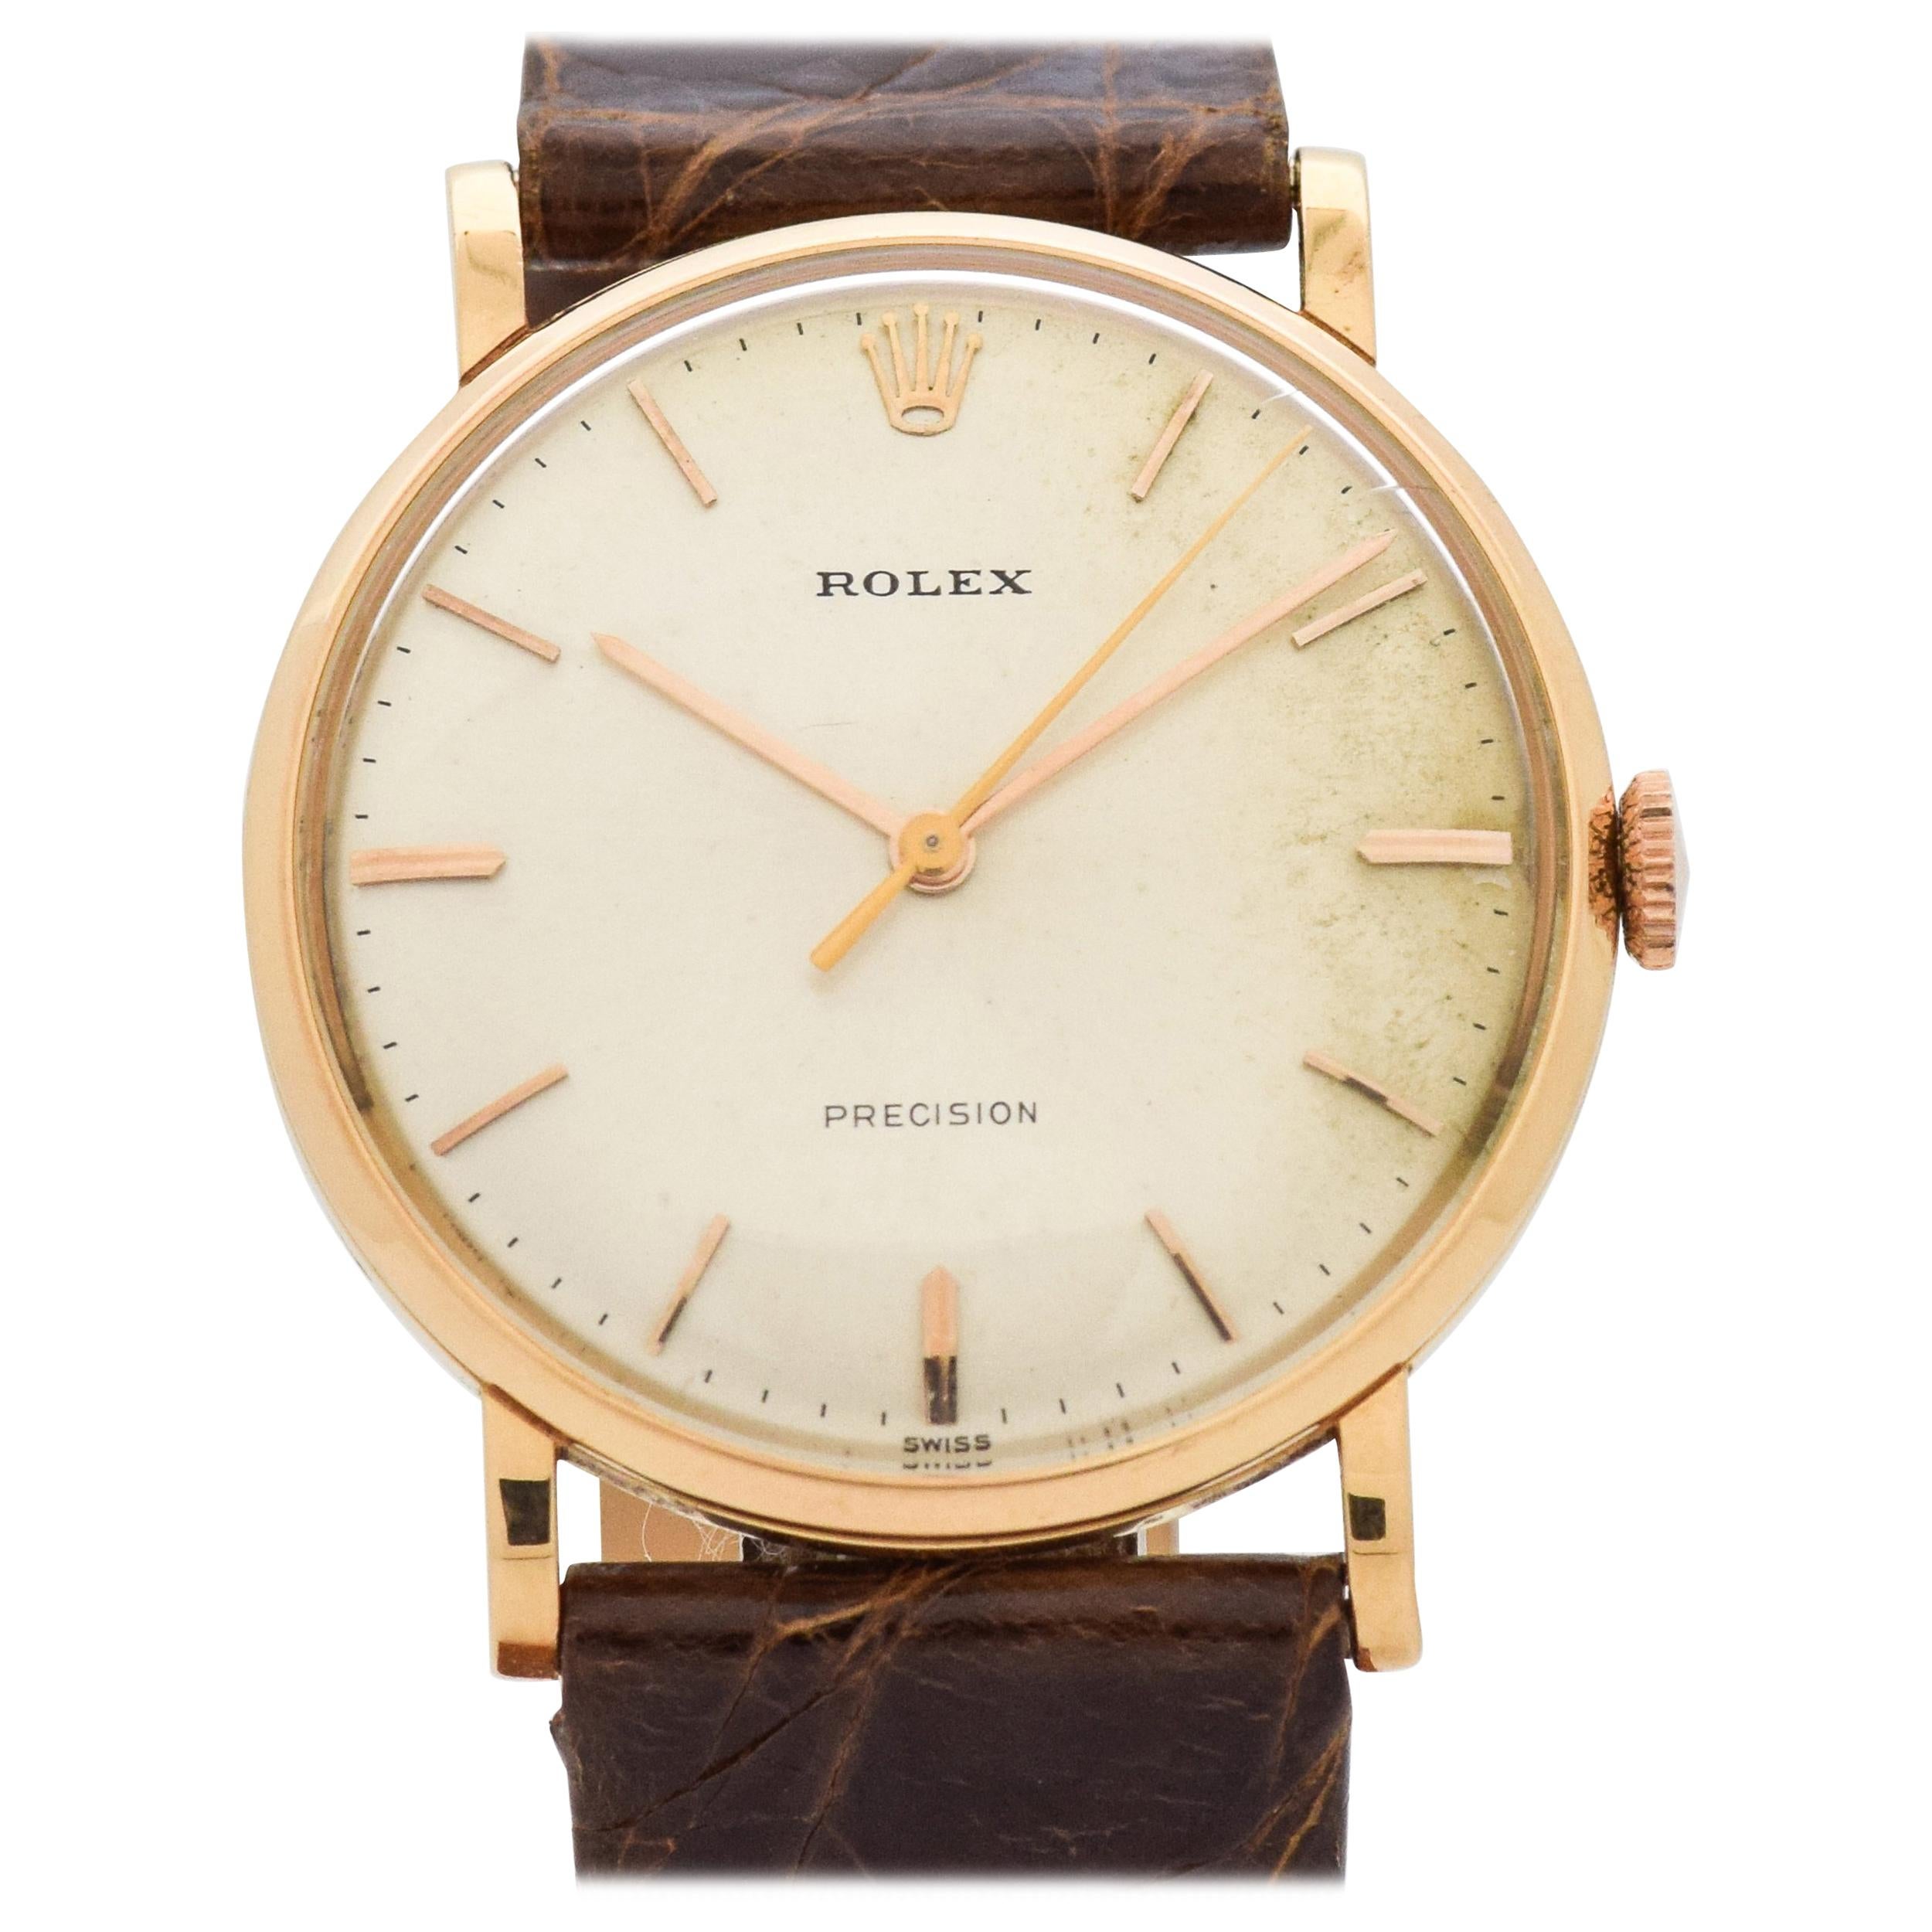 Rolex Precision Reference 9659 18 Karat Rose Gold Watch, 1958 For Sale